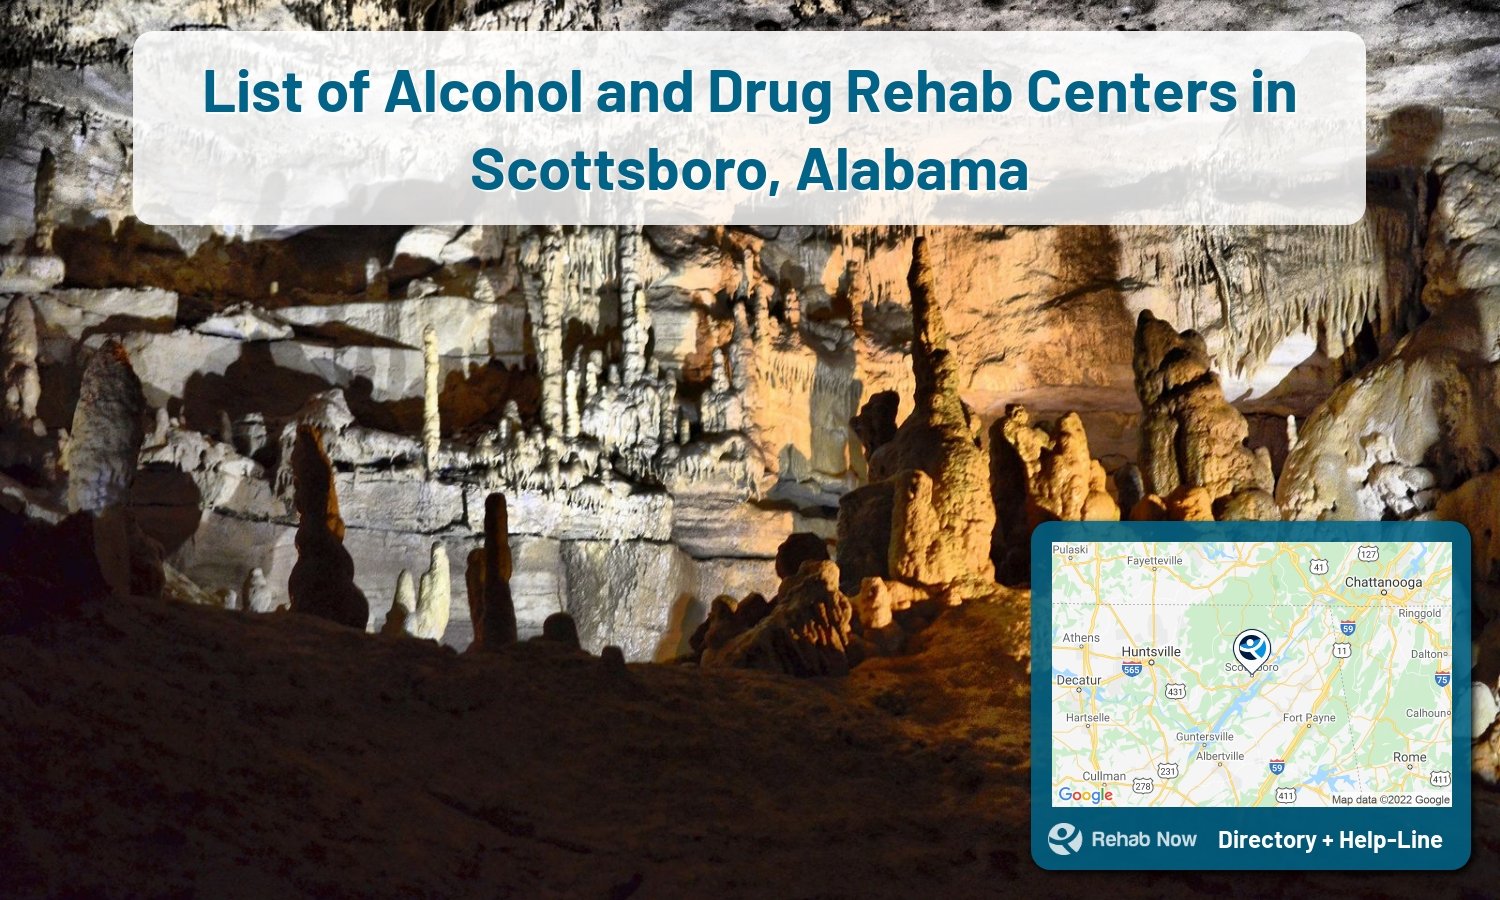 Our experts can help you find treatment now in Scottsboro, Alabama. We list drug rehab and alcohol centers in Alabama.